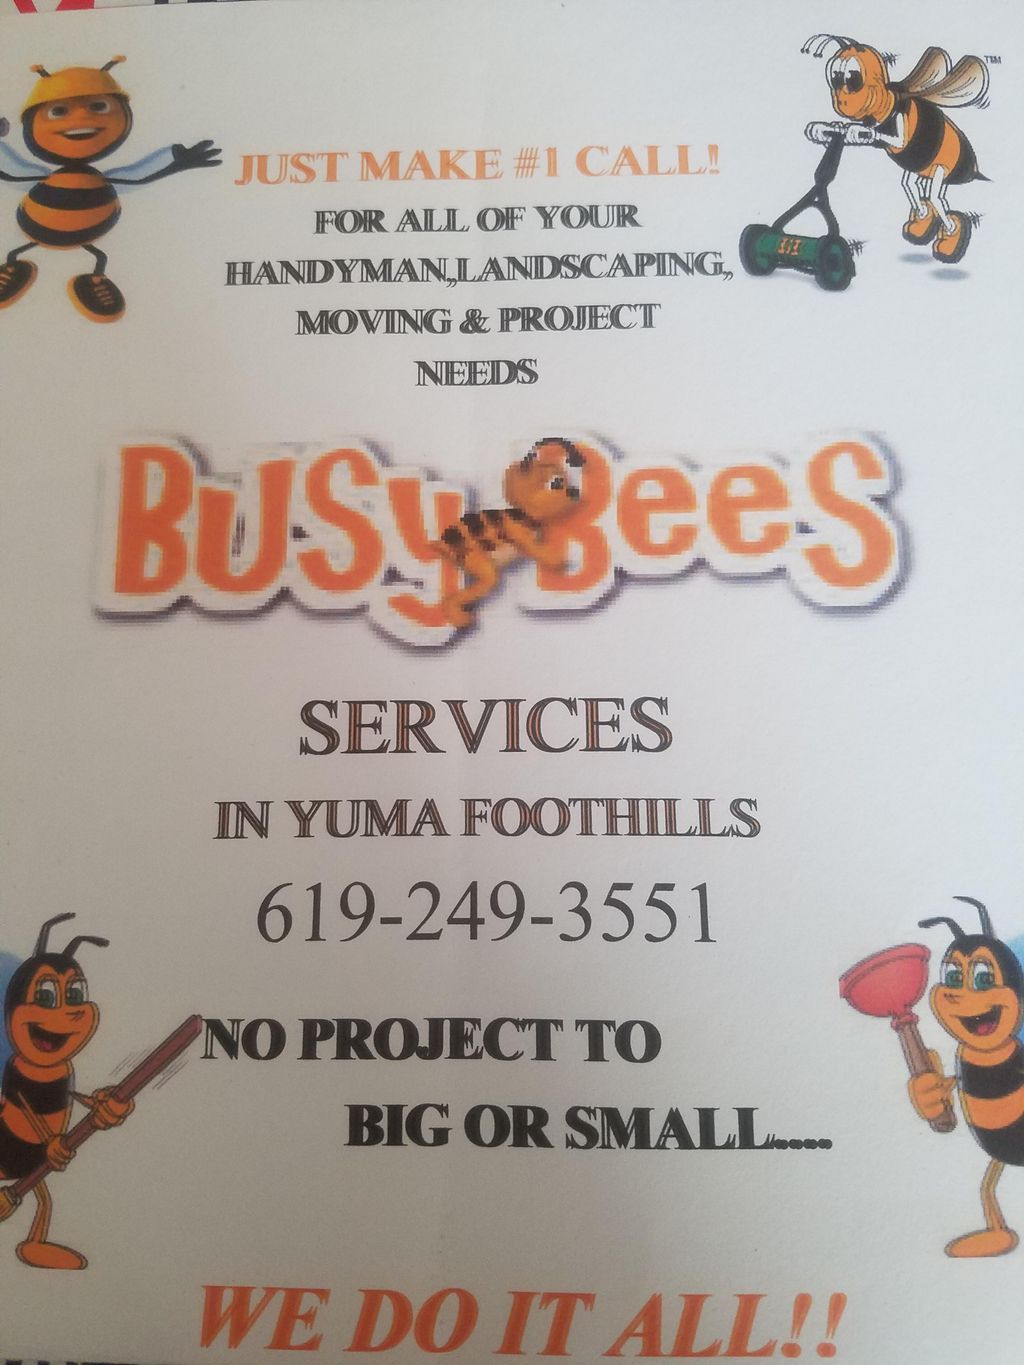 Busy Bee'z Services